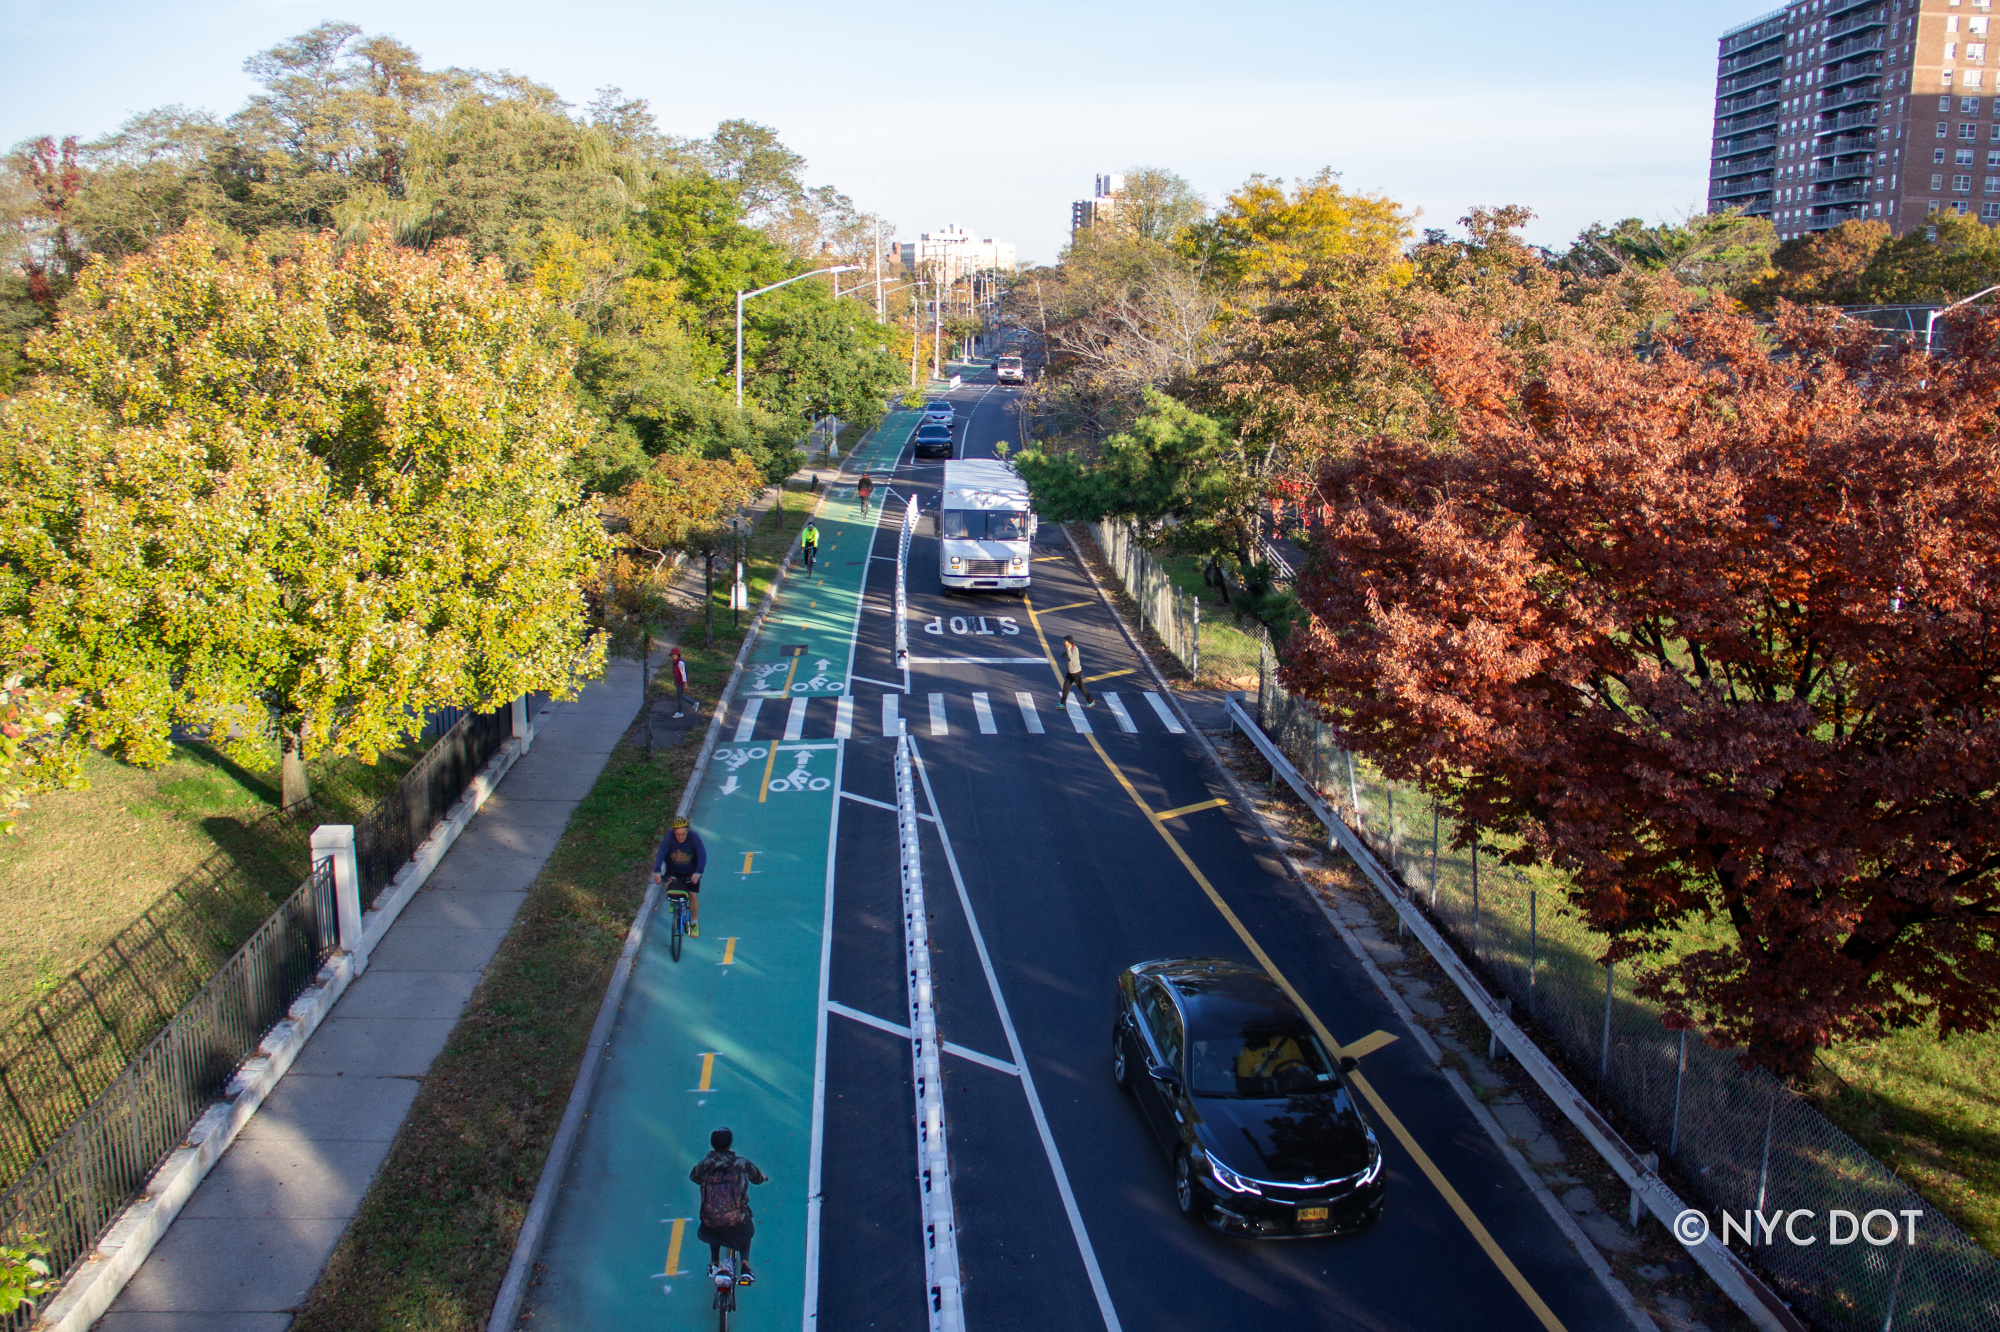 On a fall day, cyclists ride on Shore Parkway in a green bike path separated from trucks and cars. A pedestrian crosses at a crosswalk mid-shot.